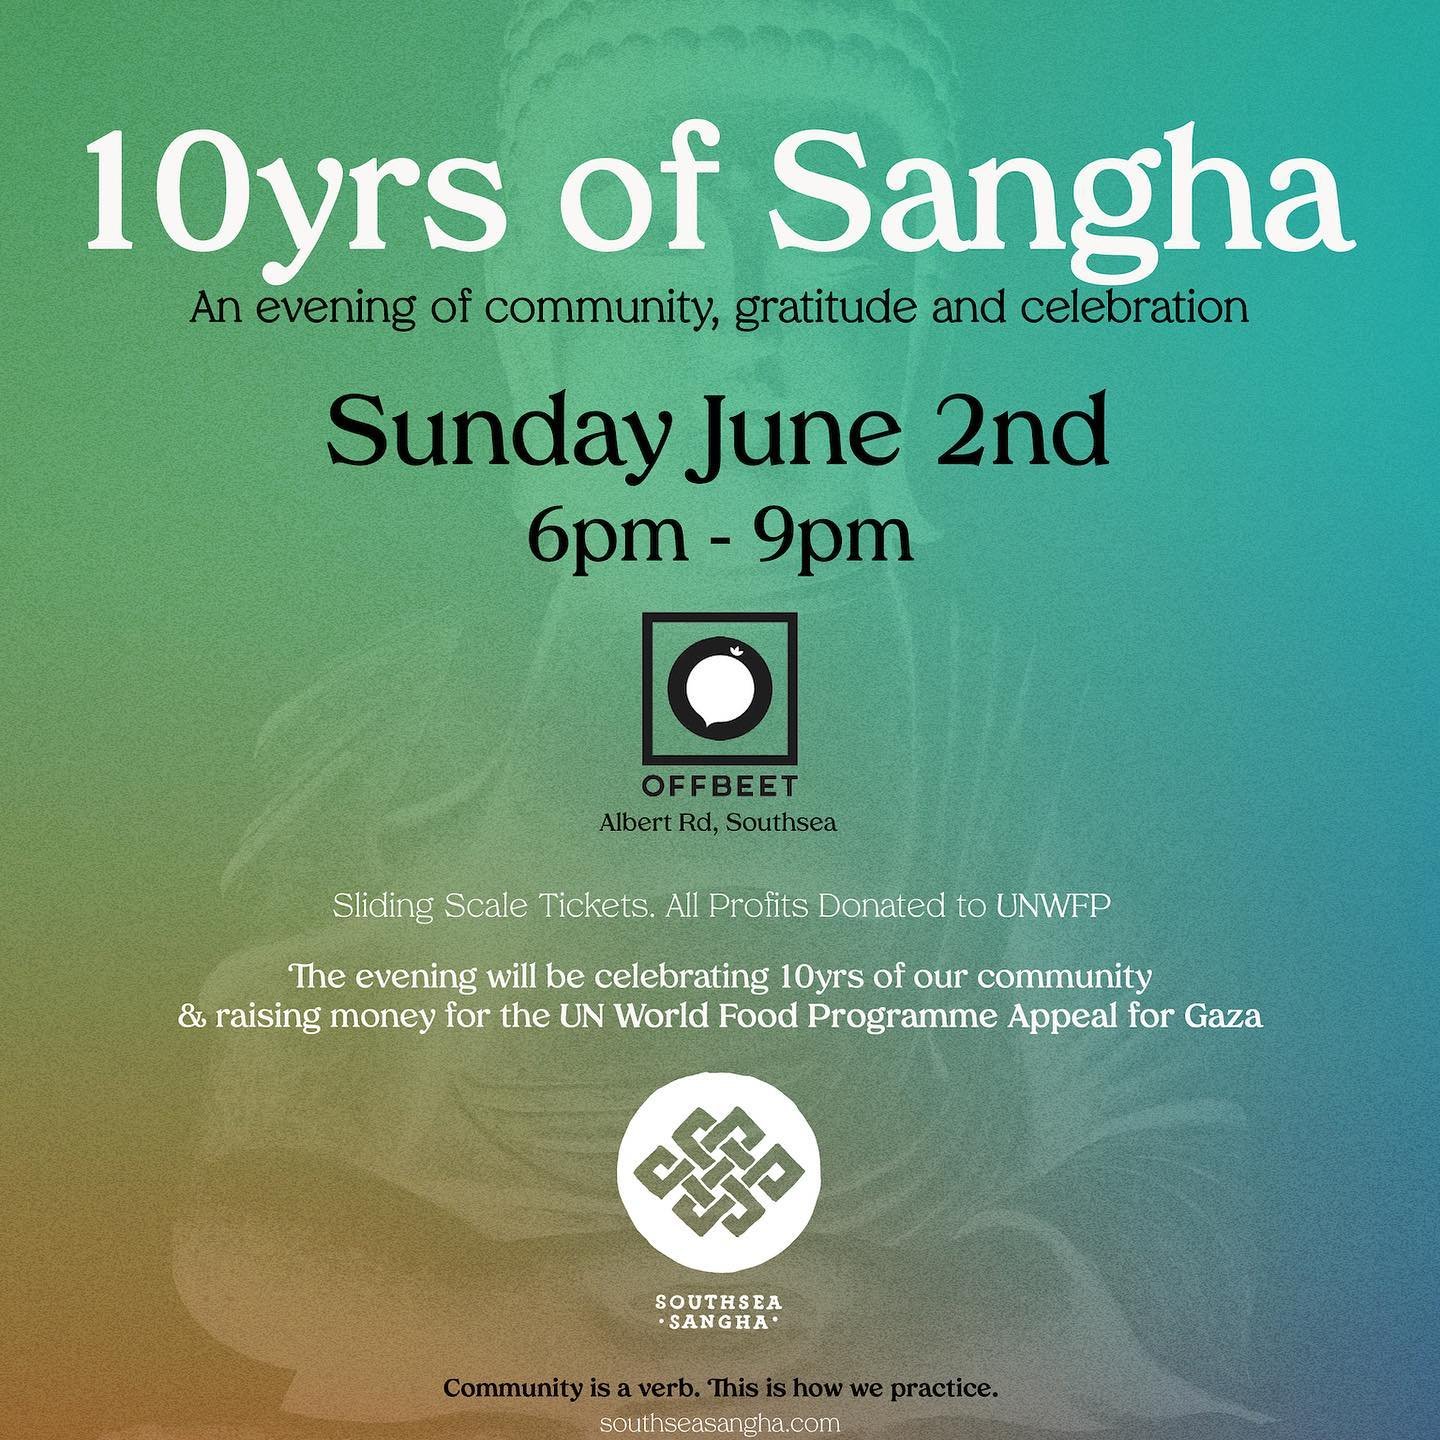 Dear Friends,
We are thrilled to announce our 10 year anniversary celebration!

Sliding scale tickets available in bio.

The event will take place on June 2nd, with our friends at @offbeet_southsea in Albert Road.

In solidarity, proceeds from the an